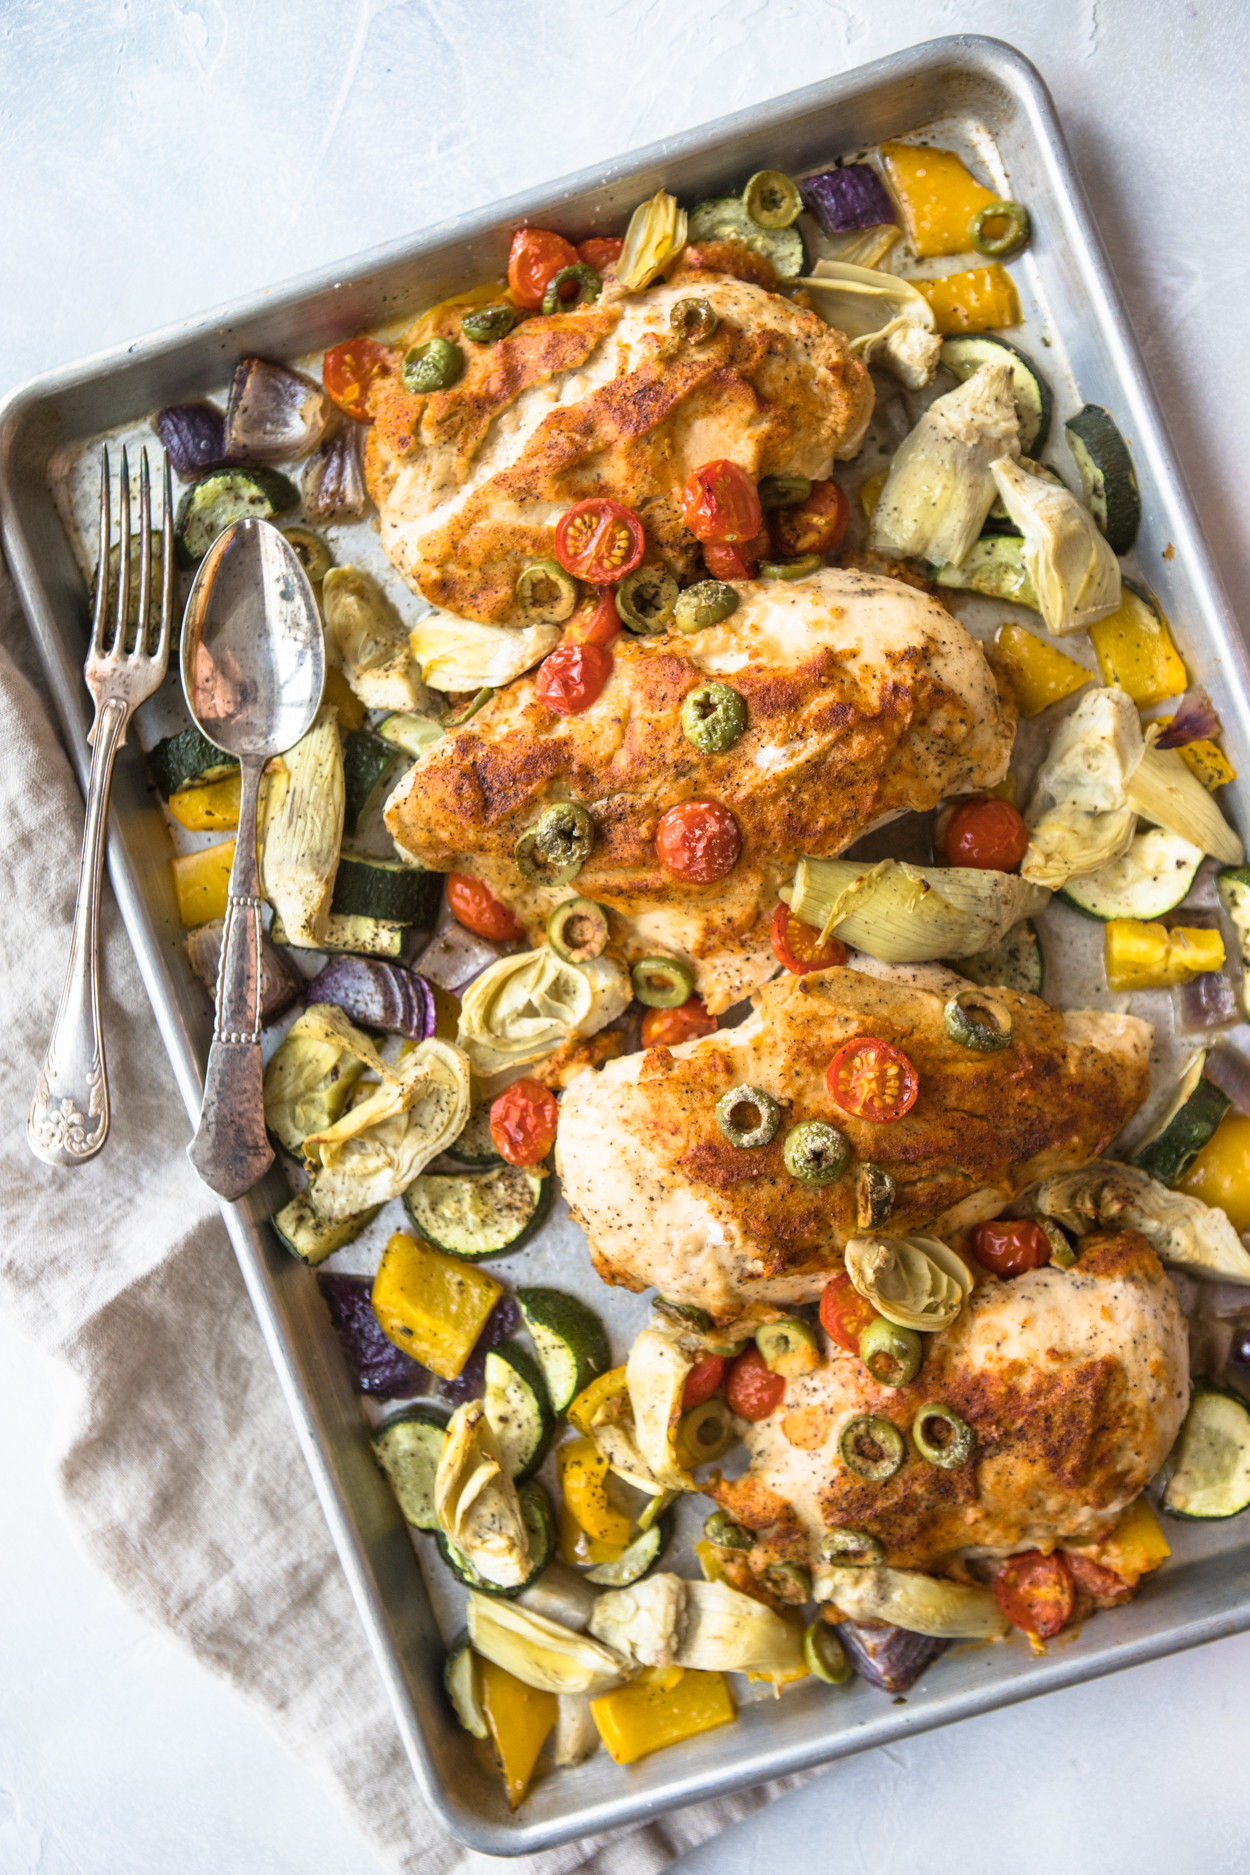 Hummus crusted chicken and roasted veggies on a rimmed baking sheet ready to serve 